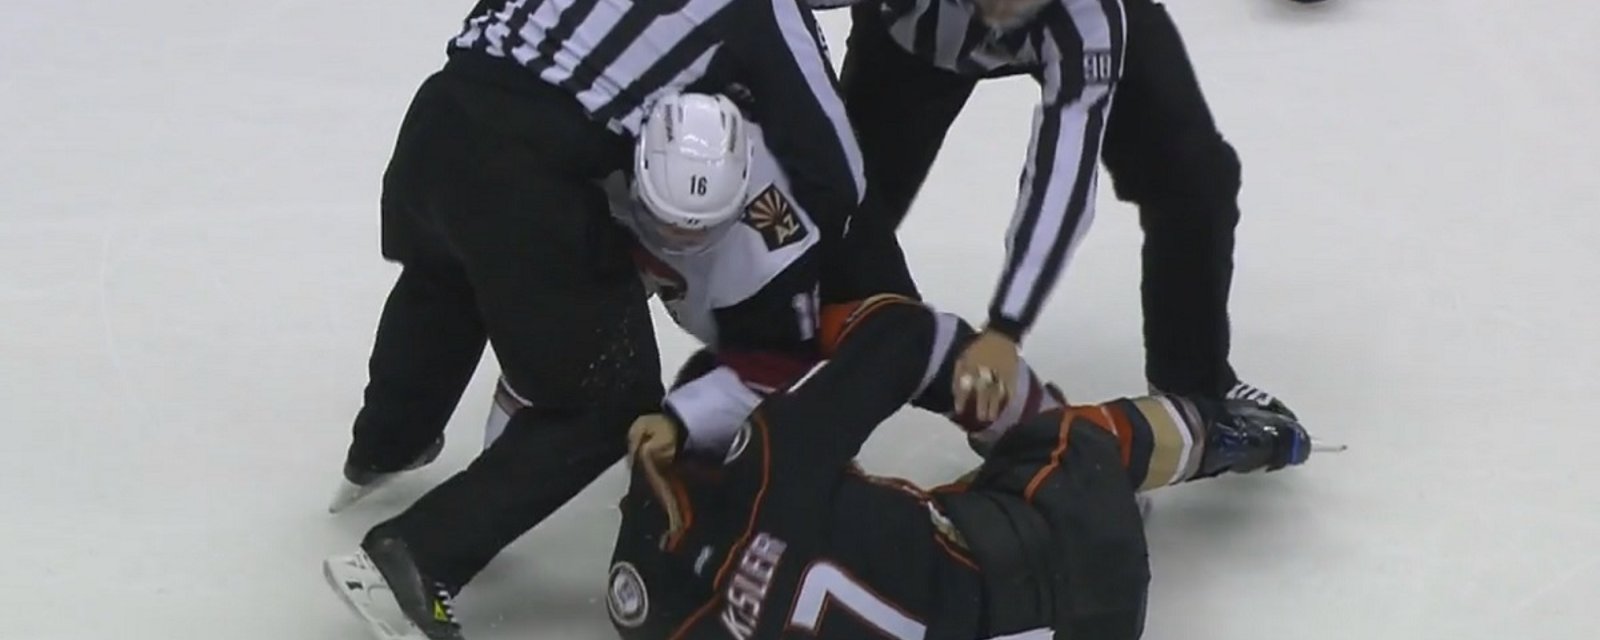 Video: Max Domi drops Ryan Kesler with one punch!